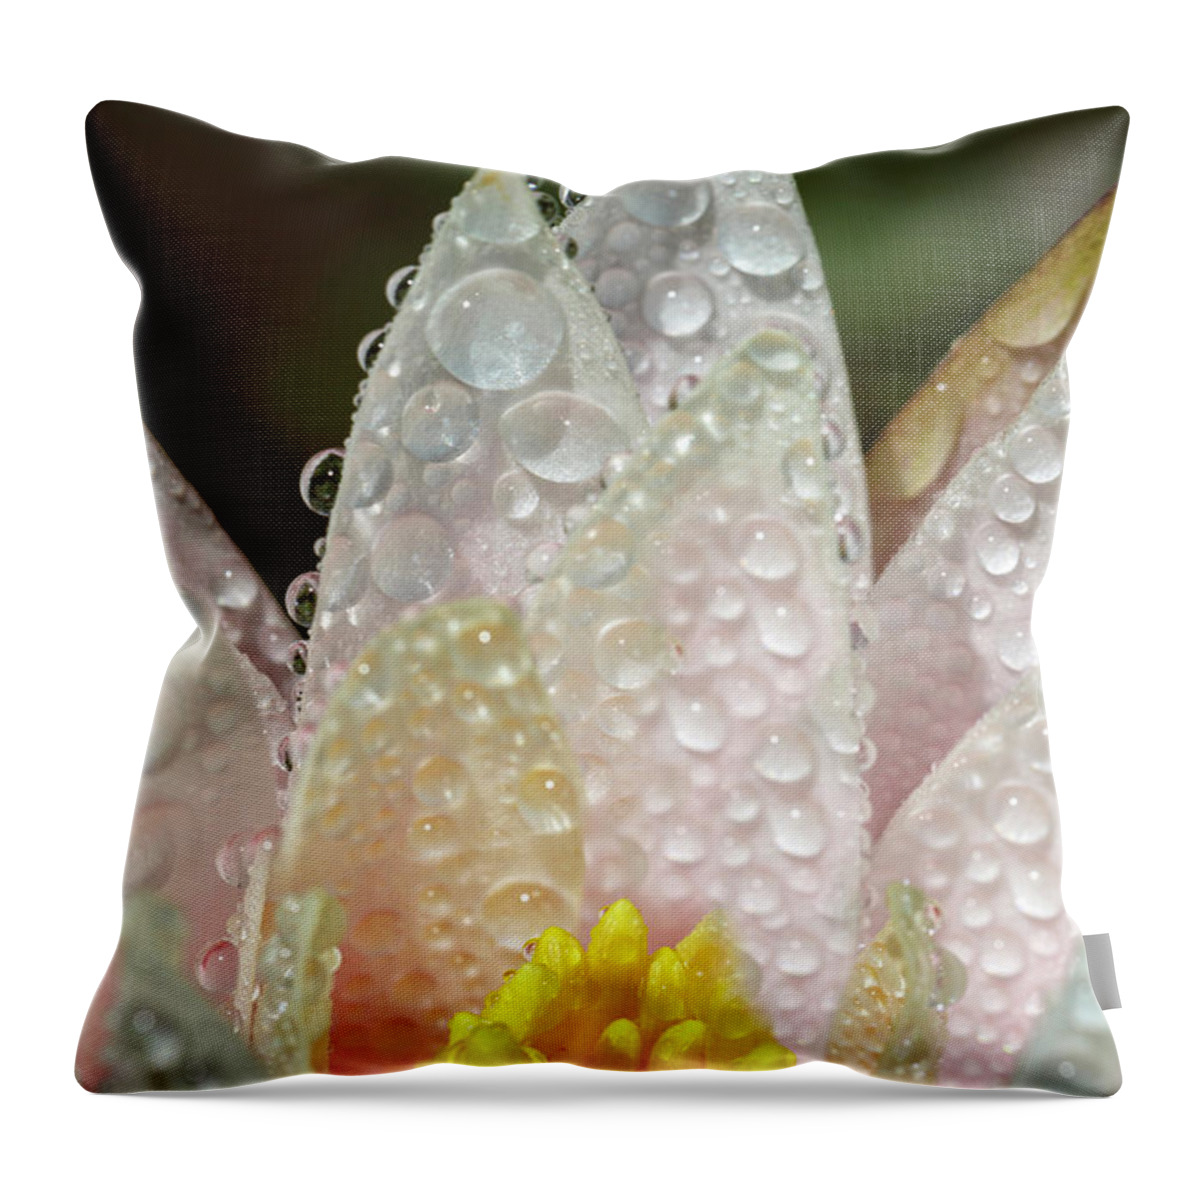 Beauty In The Rain Throw Pillow featuring the photograph Beauty In The Rain by Wes and Dotty Weber